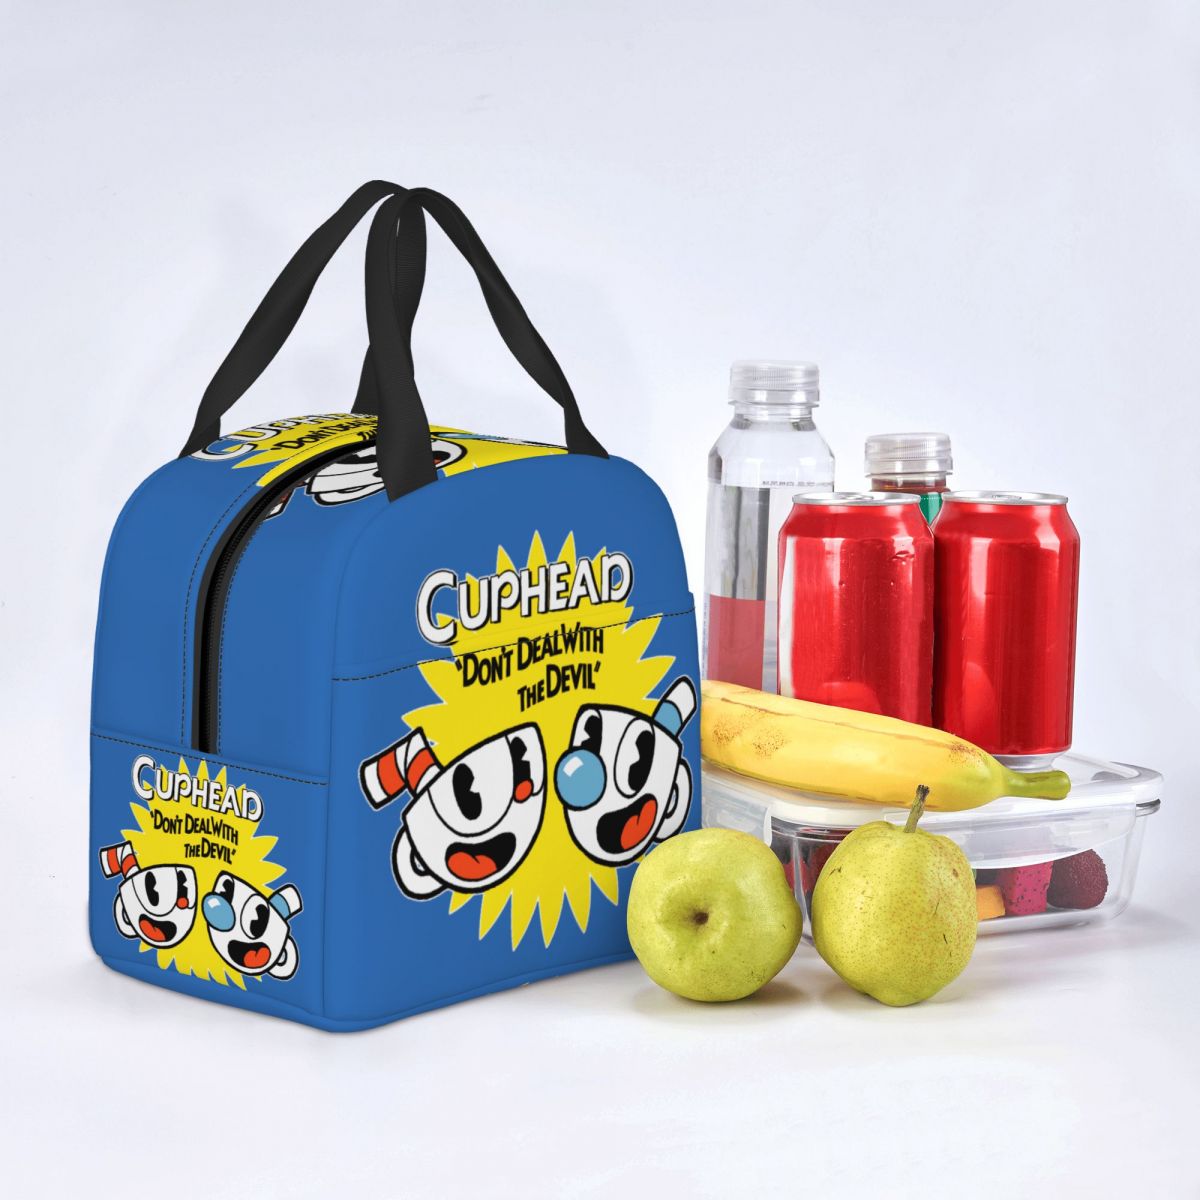 Hot Game Cuphead Mugman Lunch Bag for Women Portable Cooler Thermal Food Insulated Lunch Box Work 4 - Cuphead Plush